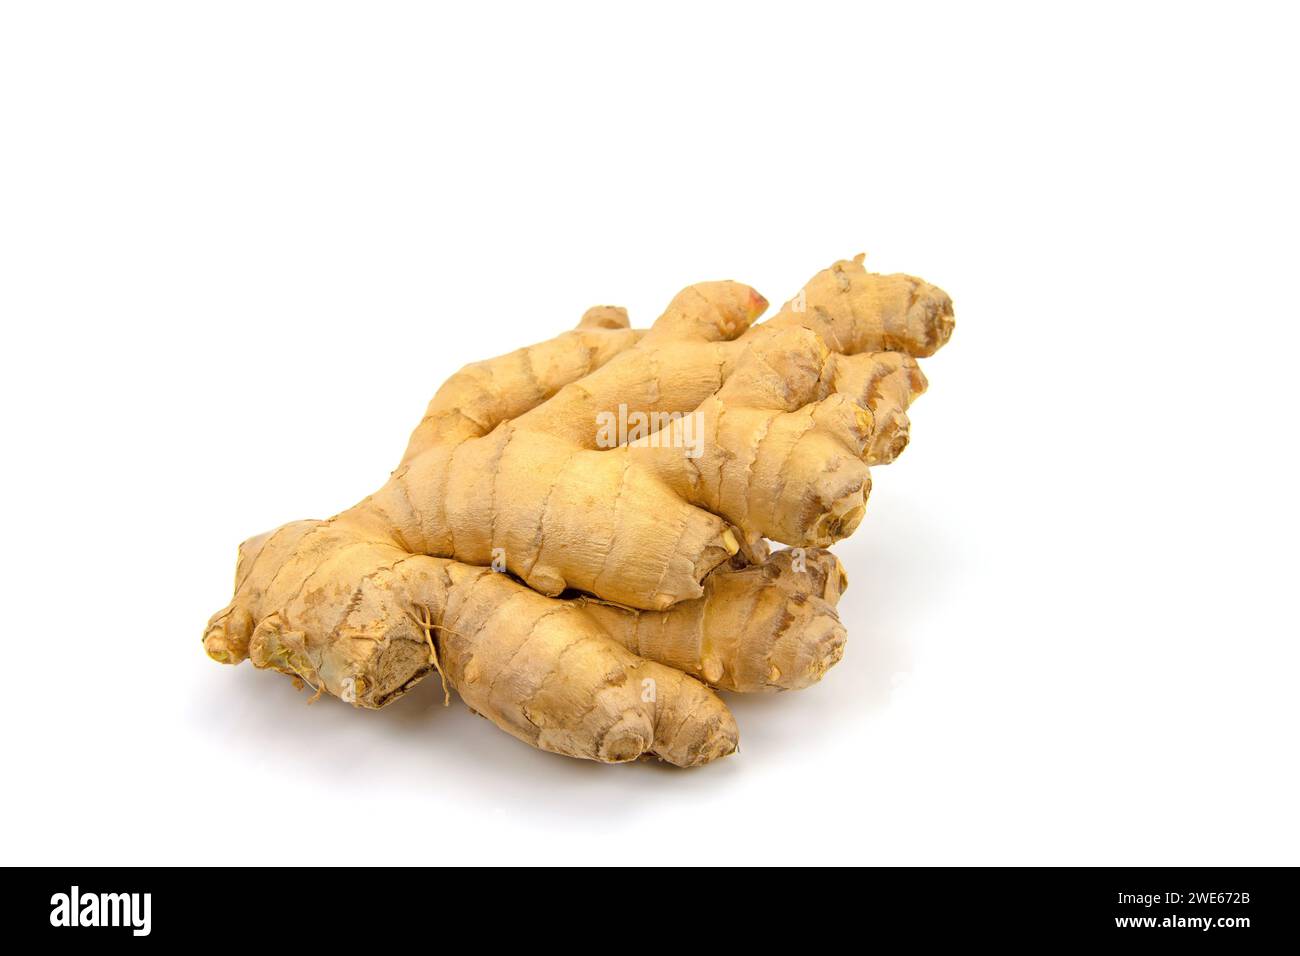 Ginger isolated against a white background Stock Photo